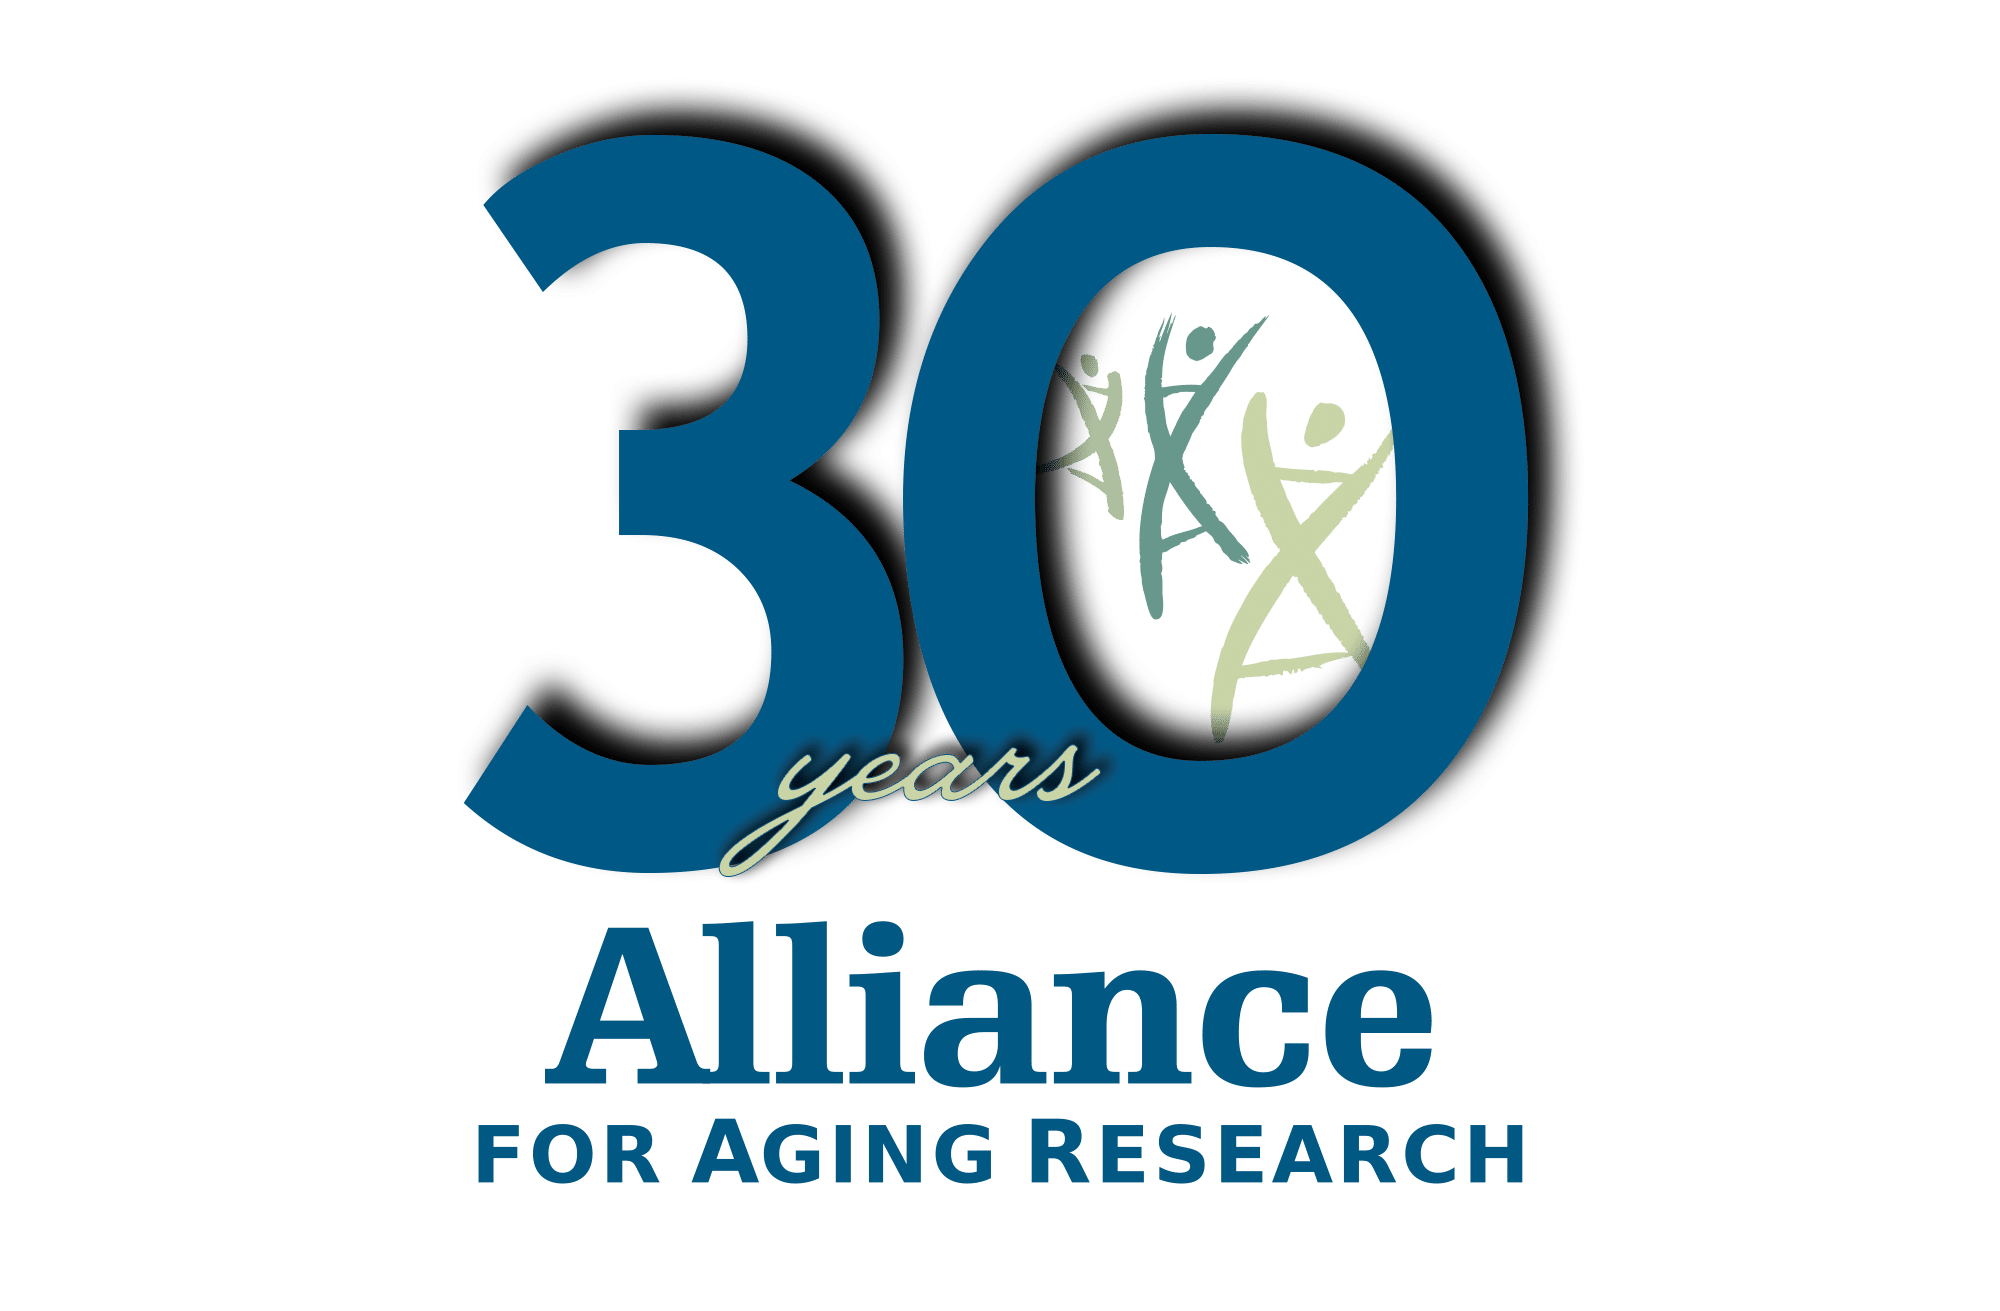 30 Years of Alliance for Aging Research logo.